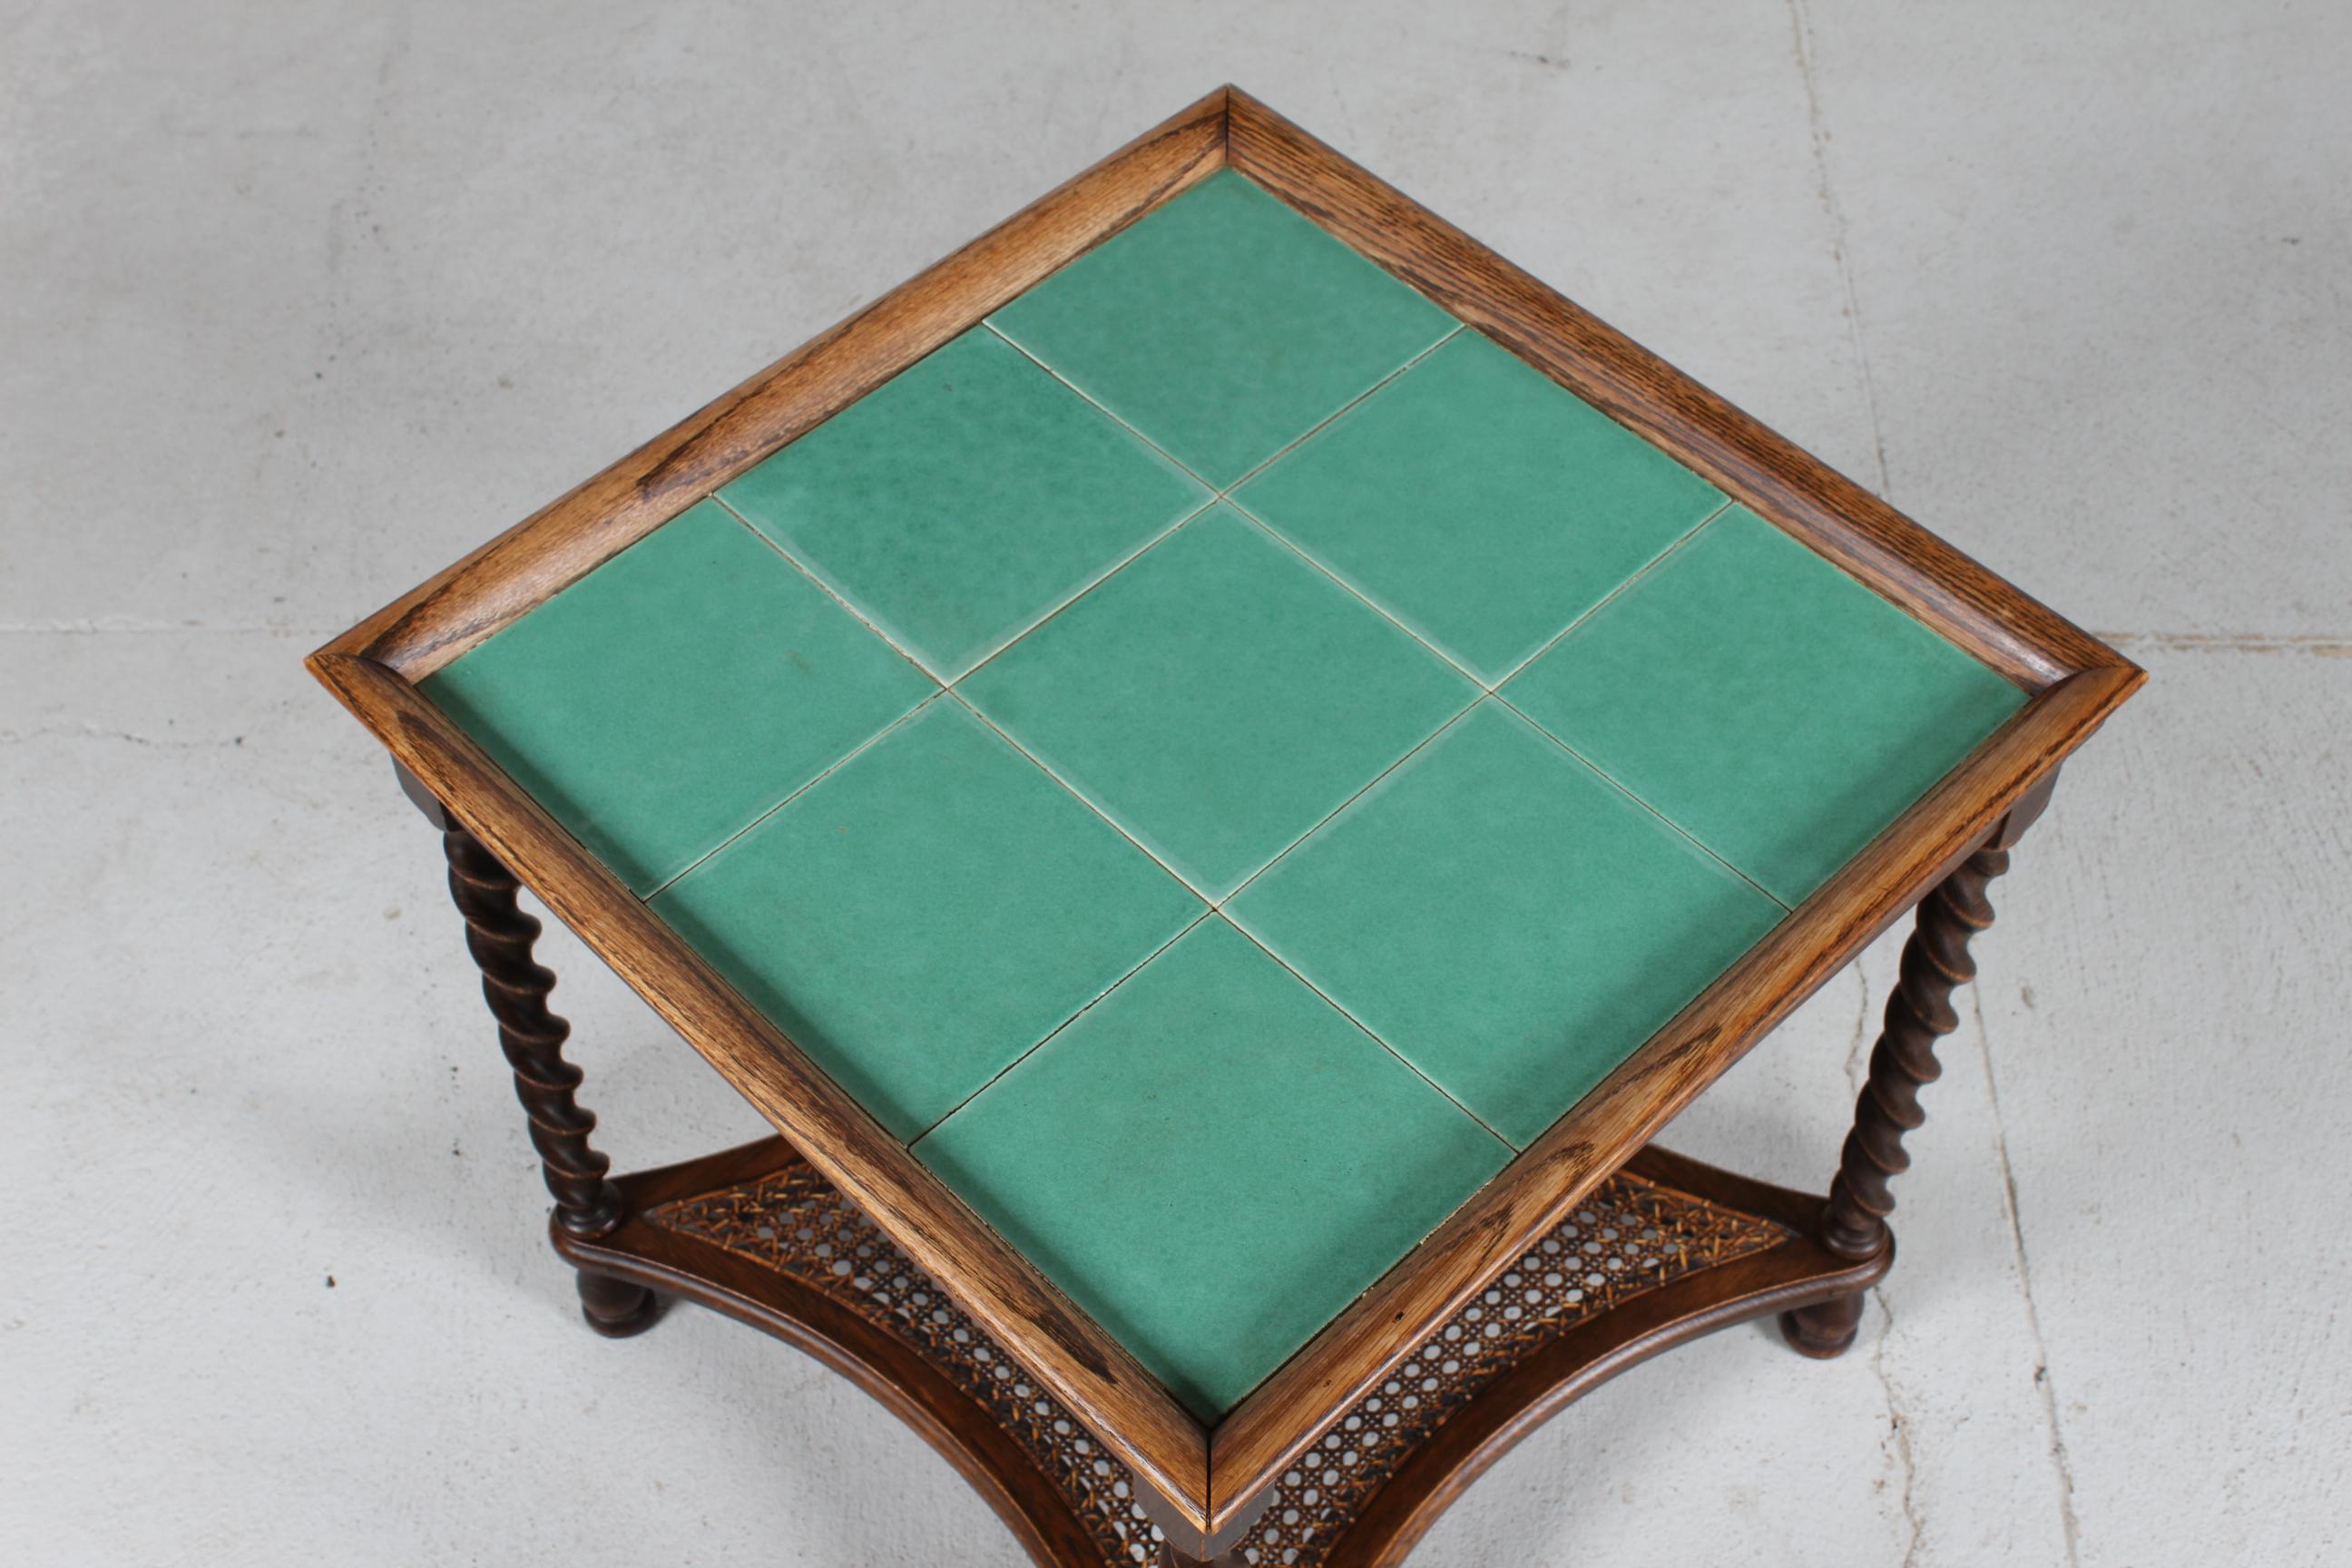 20th Century Art Deco Side Table with Jade Green Tiles by Danish Cabinetmaker, 1930-1940s For Sale